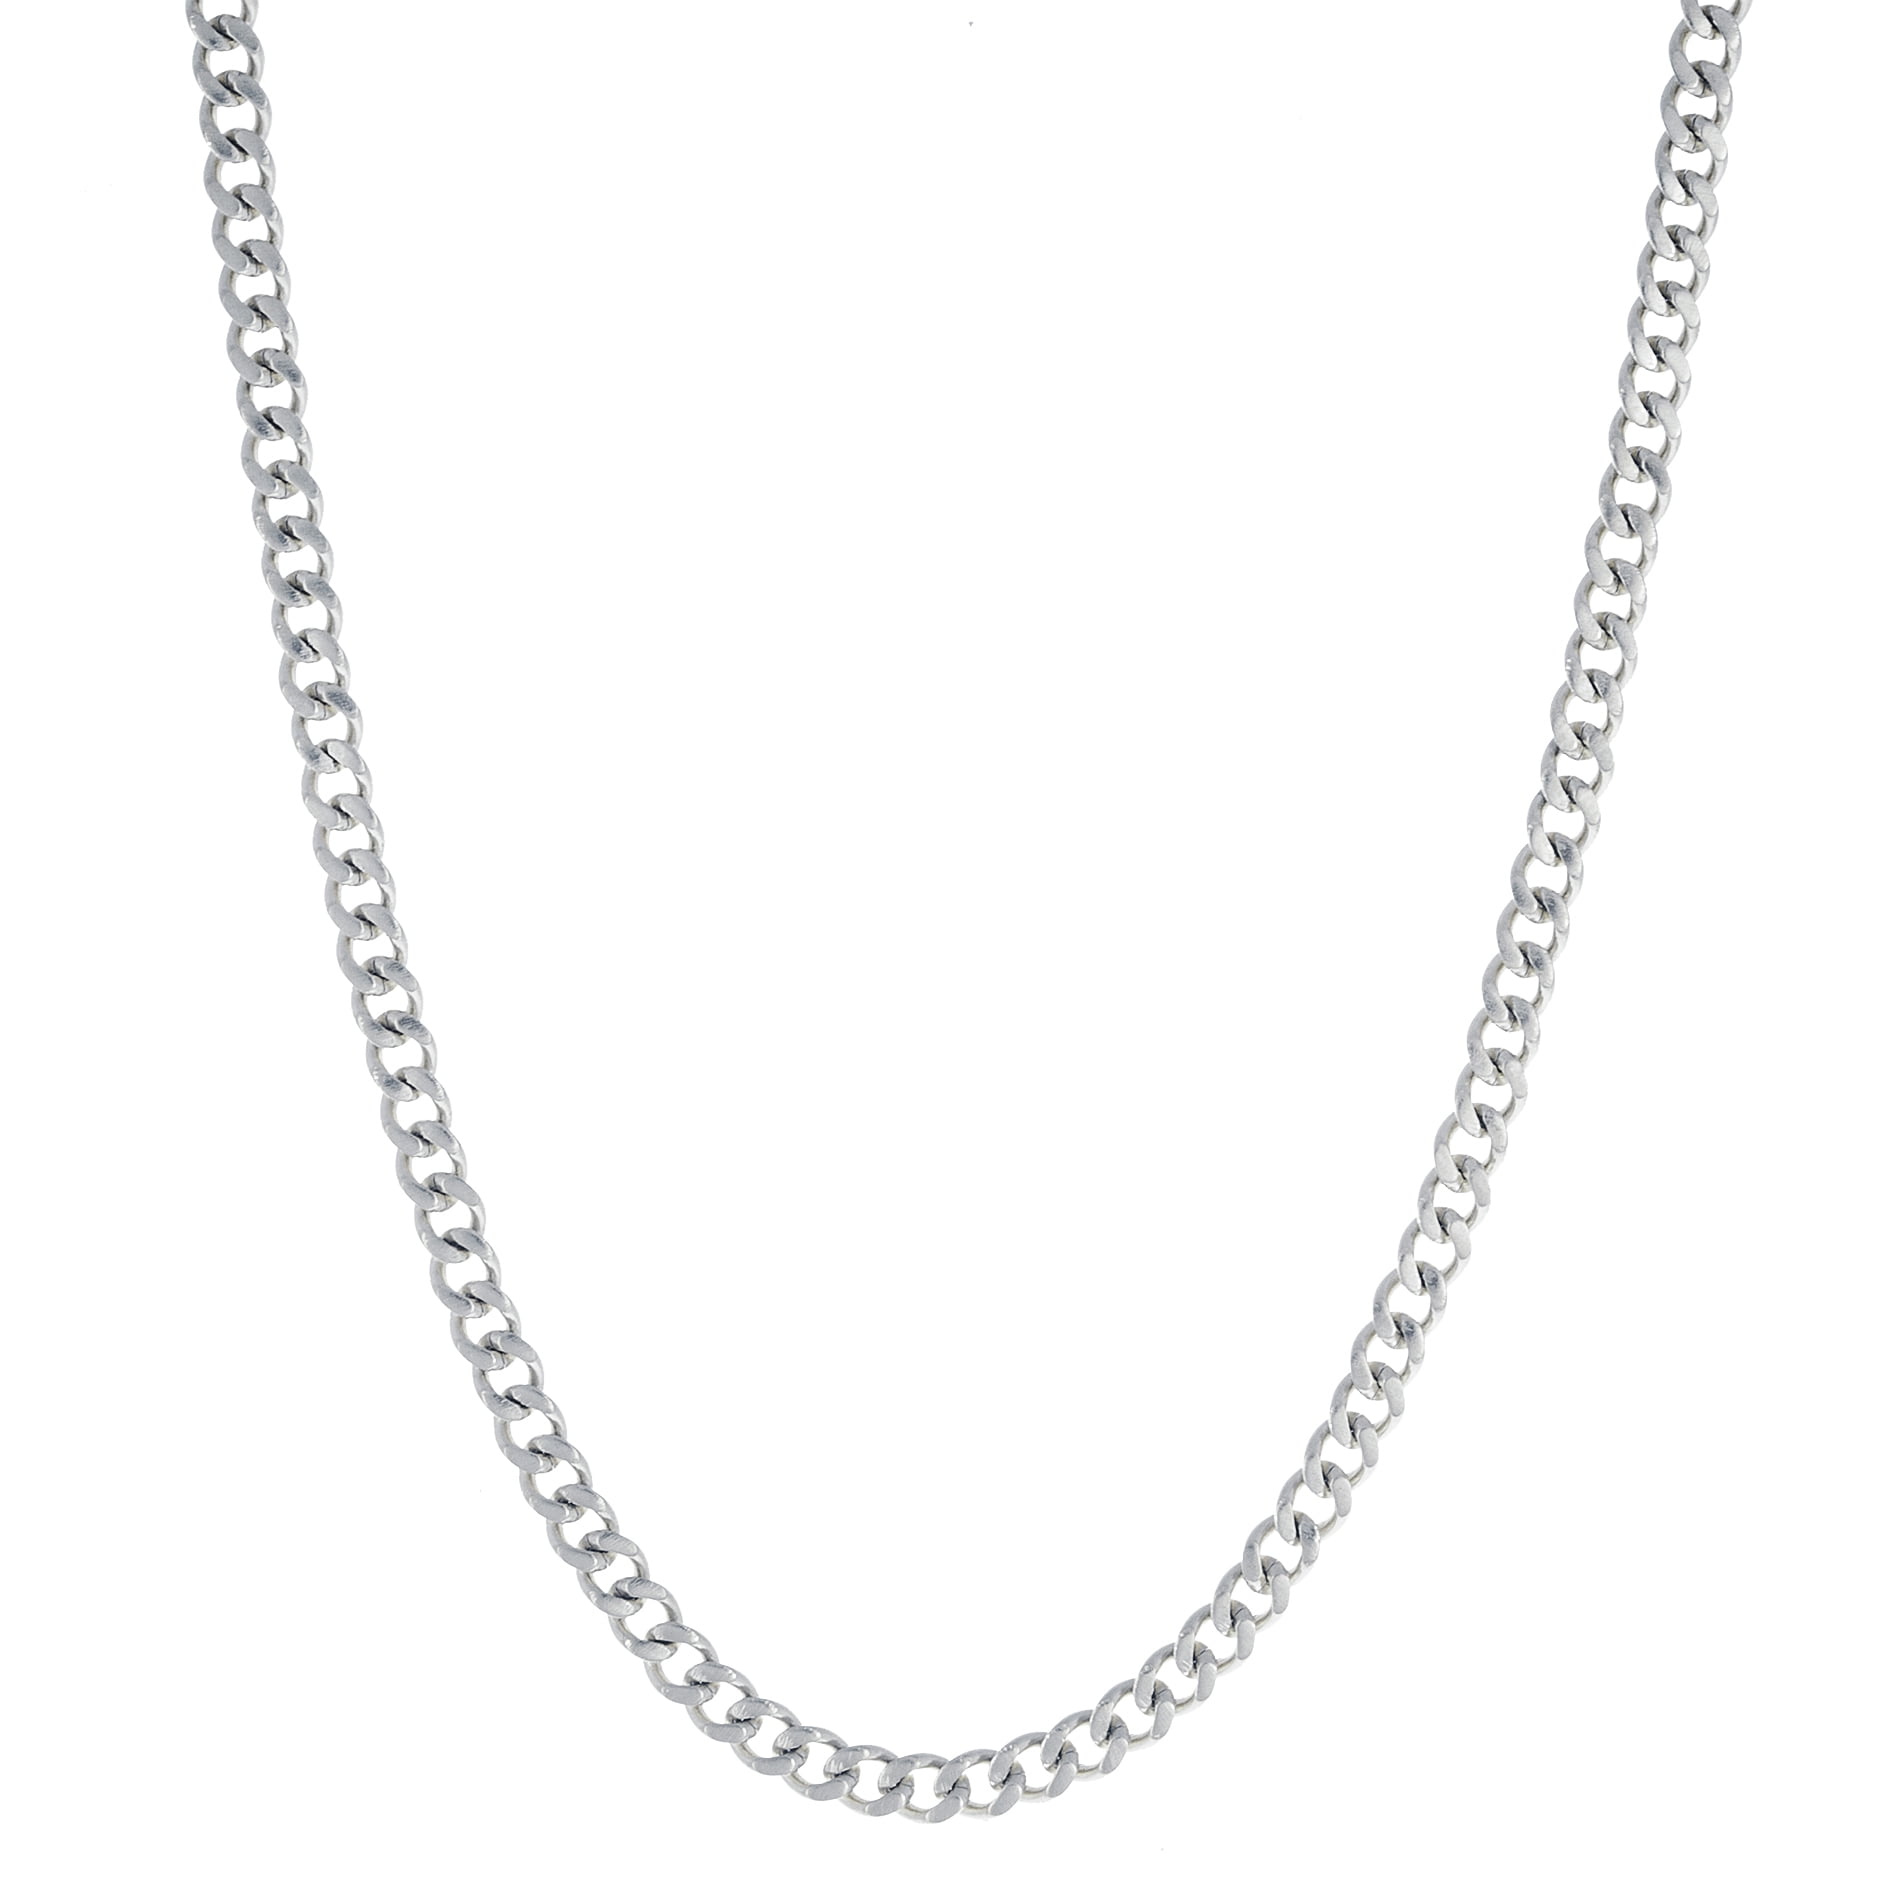 1.5mm-5mm 10-100 Black or Silver Stainless Steel Ball Chain Necklace 